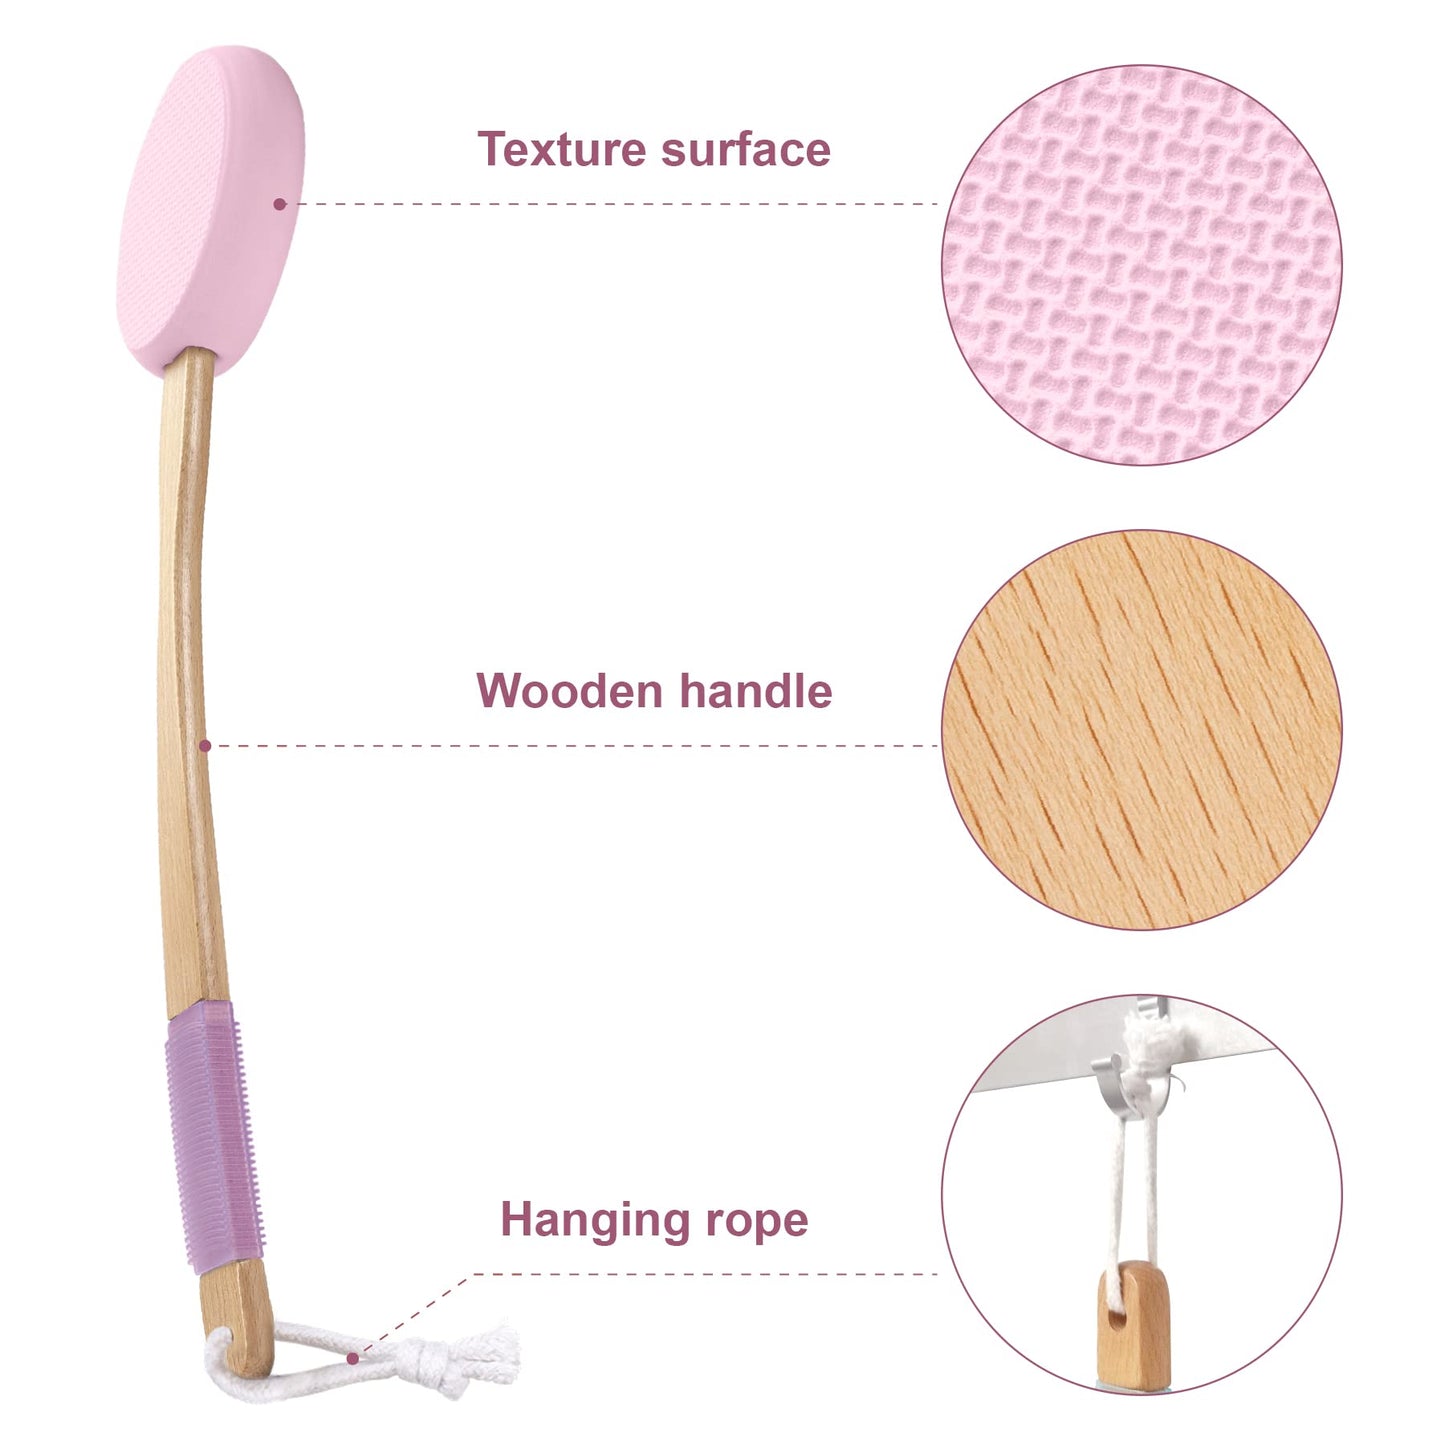 AmazerBath Lotion Applicator for Back, Feet, 4 Replaceable Pads with 1 Long Handled, Back Lotion Applicator for Elderly, Women, Apply Cream Medicine Skin Cream Moisturizer Sunscreen Tanner, Pink